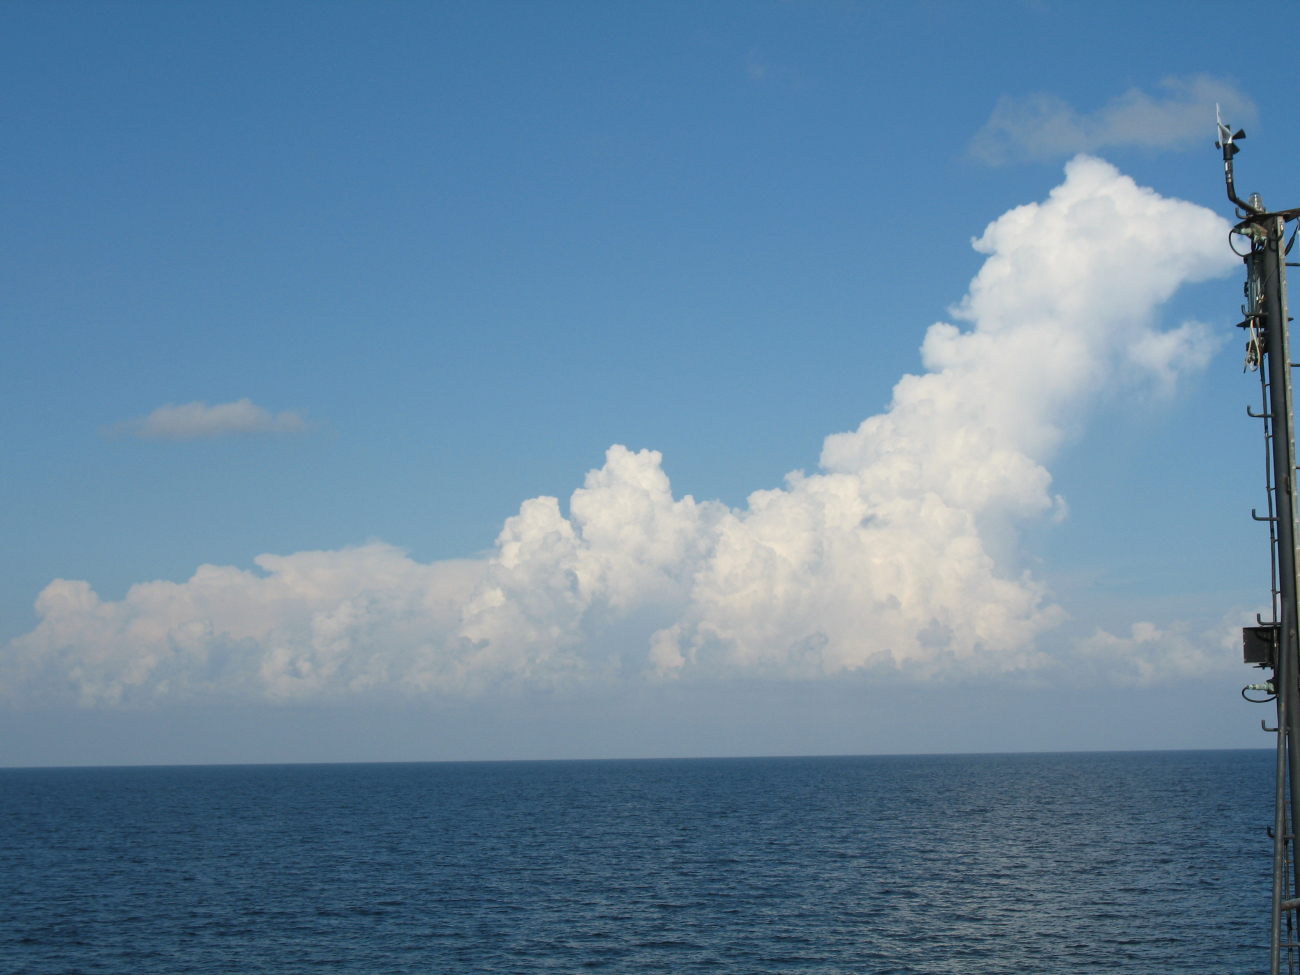 While the TAO buoy streams aft, innocent looking clouds approach